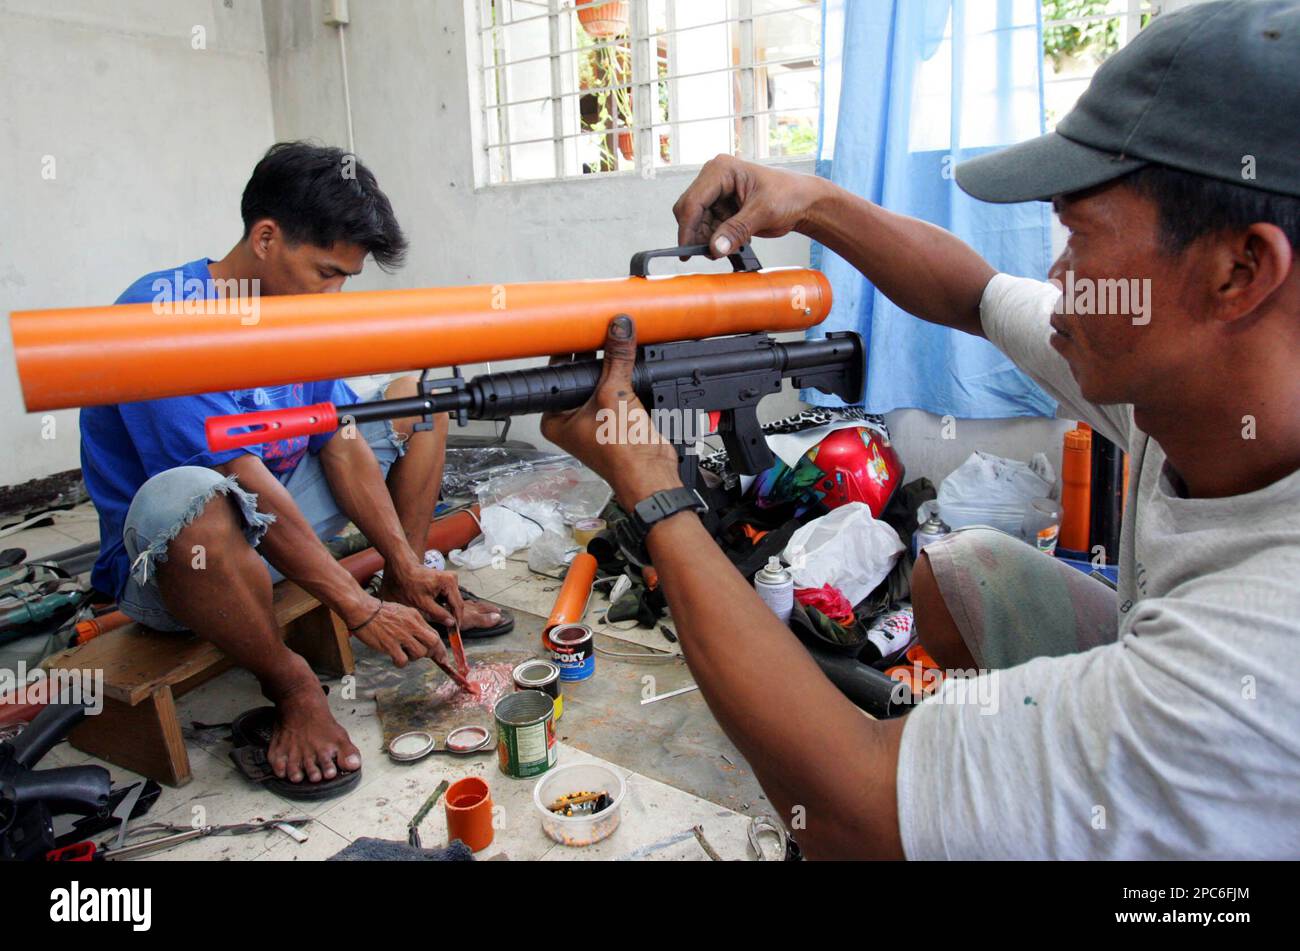 Rolando Santos, tries to fit a big plastic tubing into a plastic toy gun  inside their workshop Wednesday, Dec. 20, 2006 in the town of Kawit in  Cavite province south of Manila.